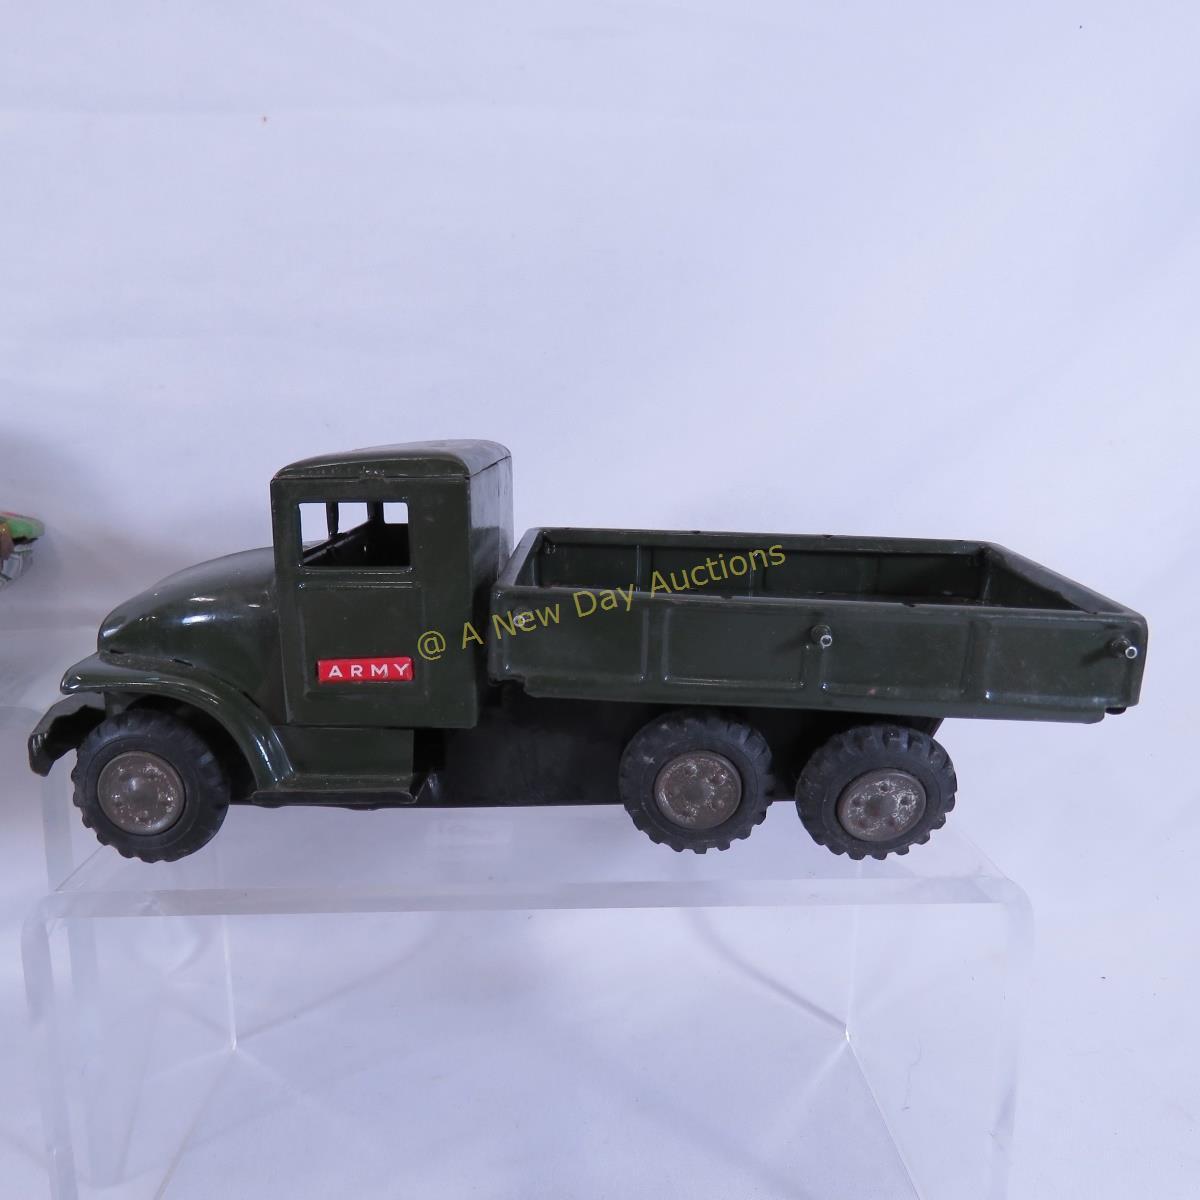 Vintage military toys, tanks, truck and more